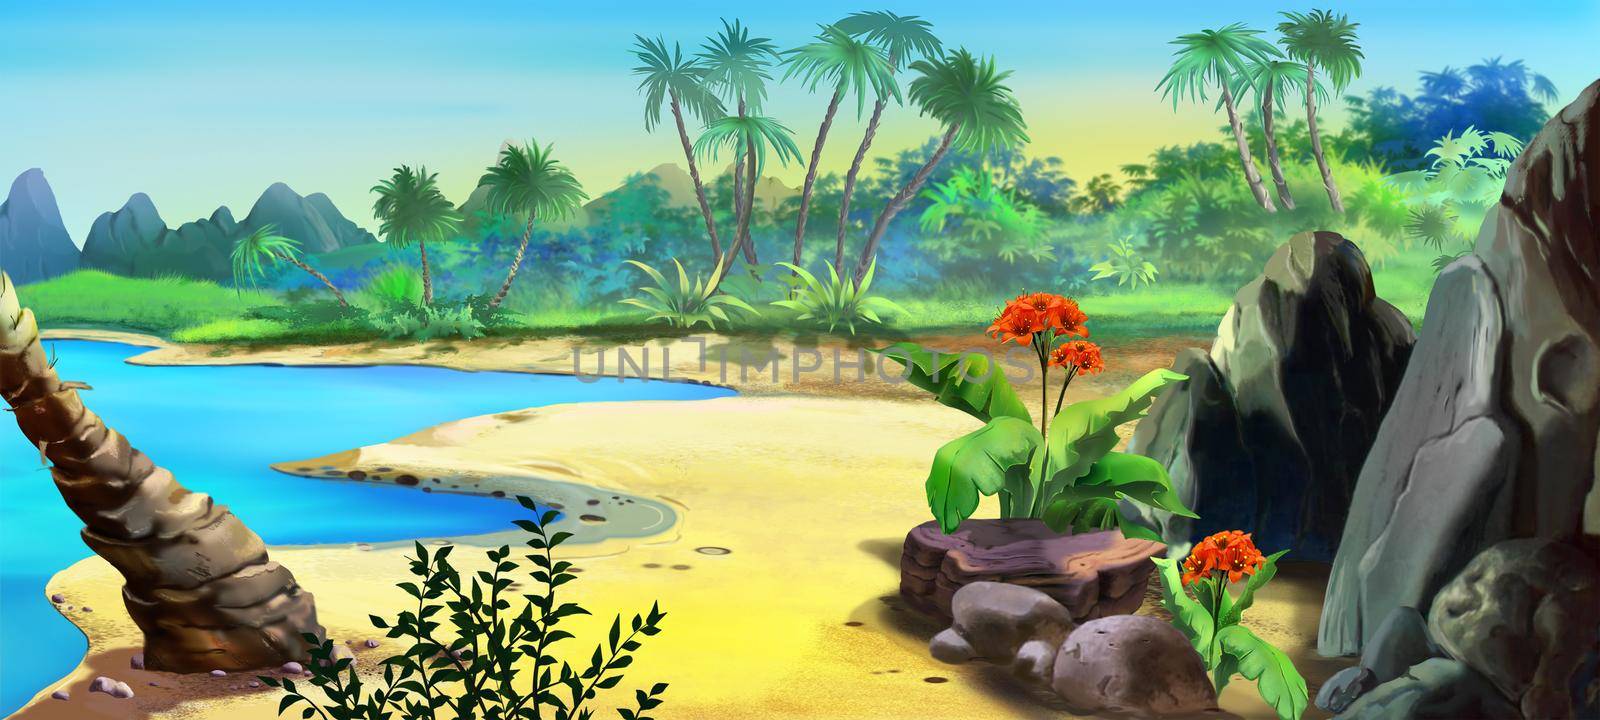 Sandy coast of the island in the tropics on a sunny day. Digital Painting Background, Illustration.